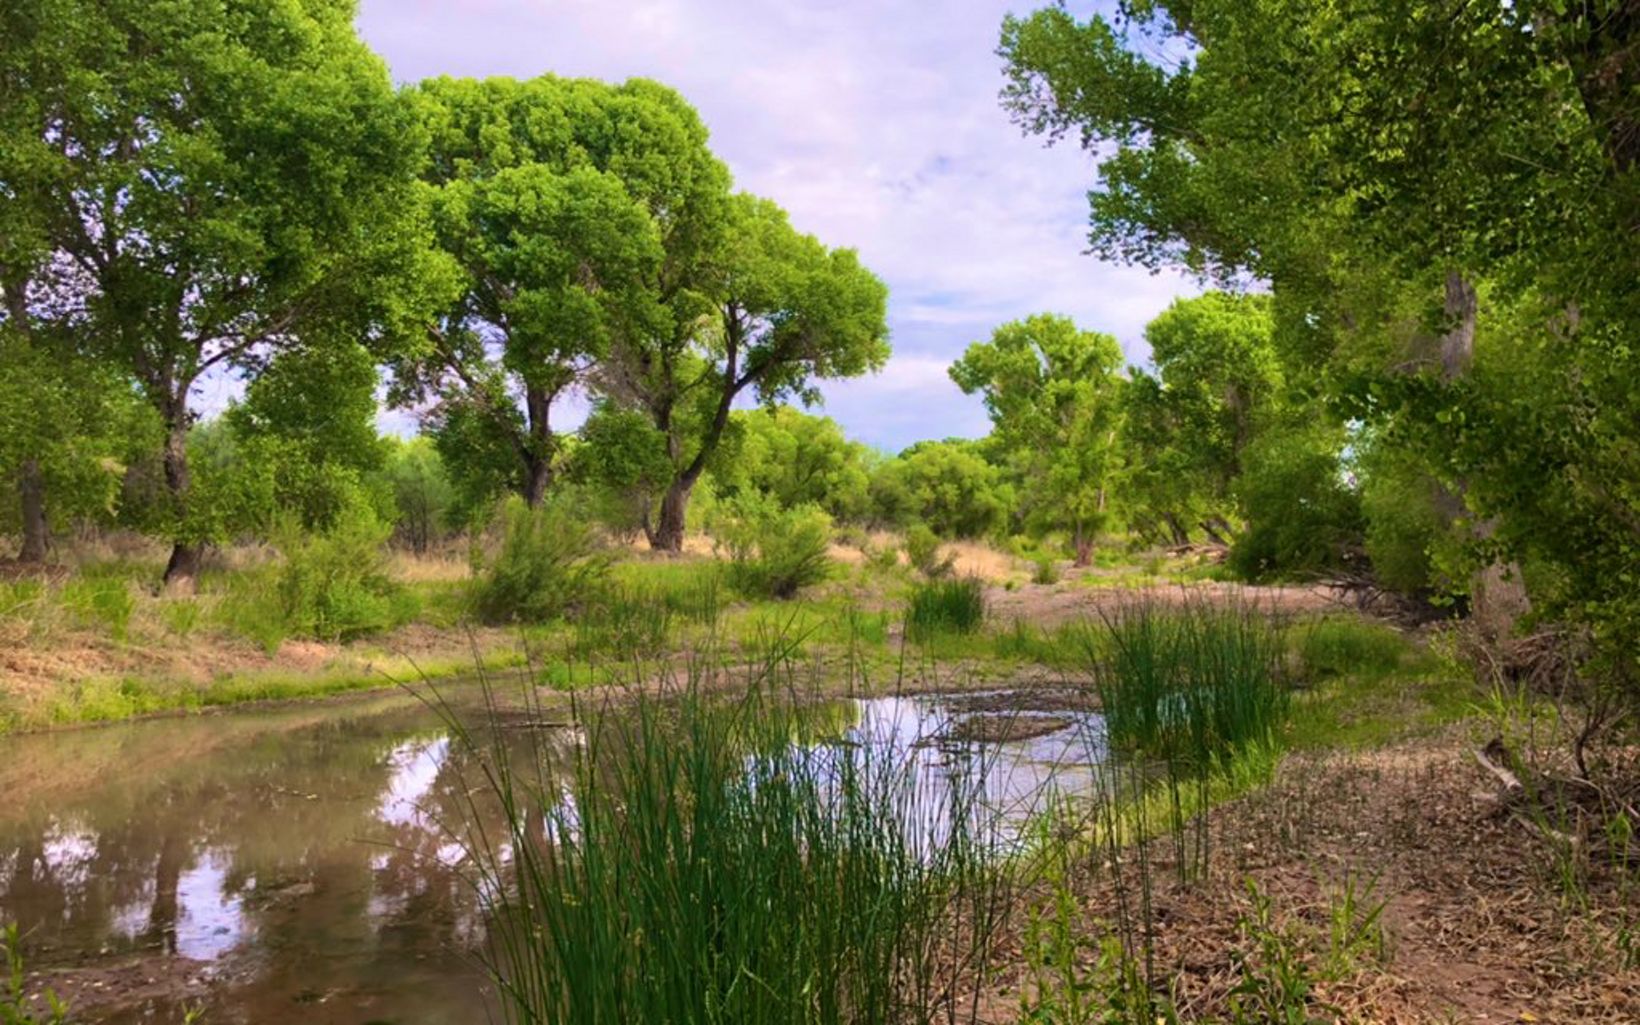 Lush cottonwood trees stand along a river.